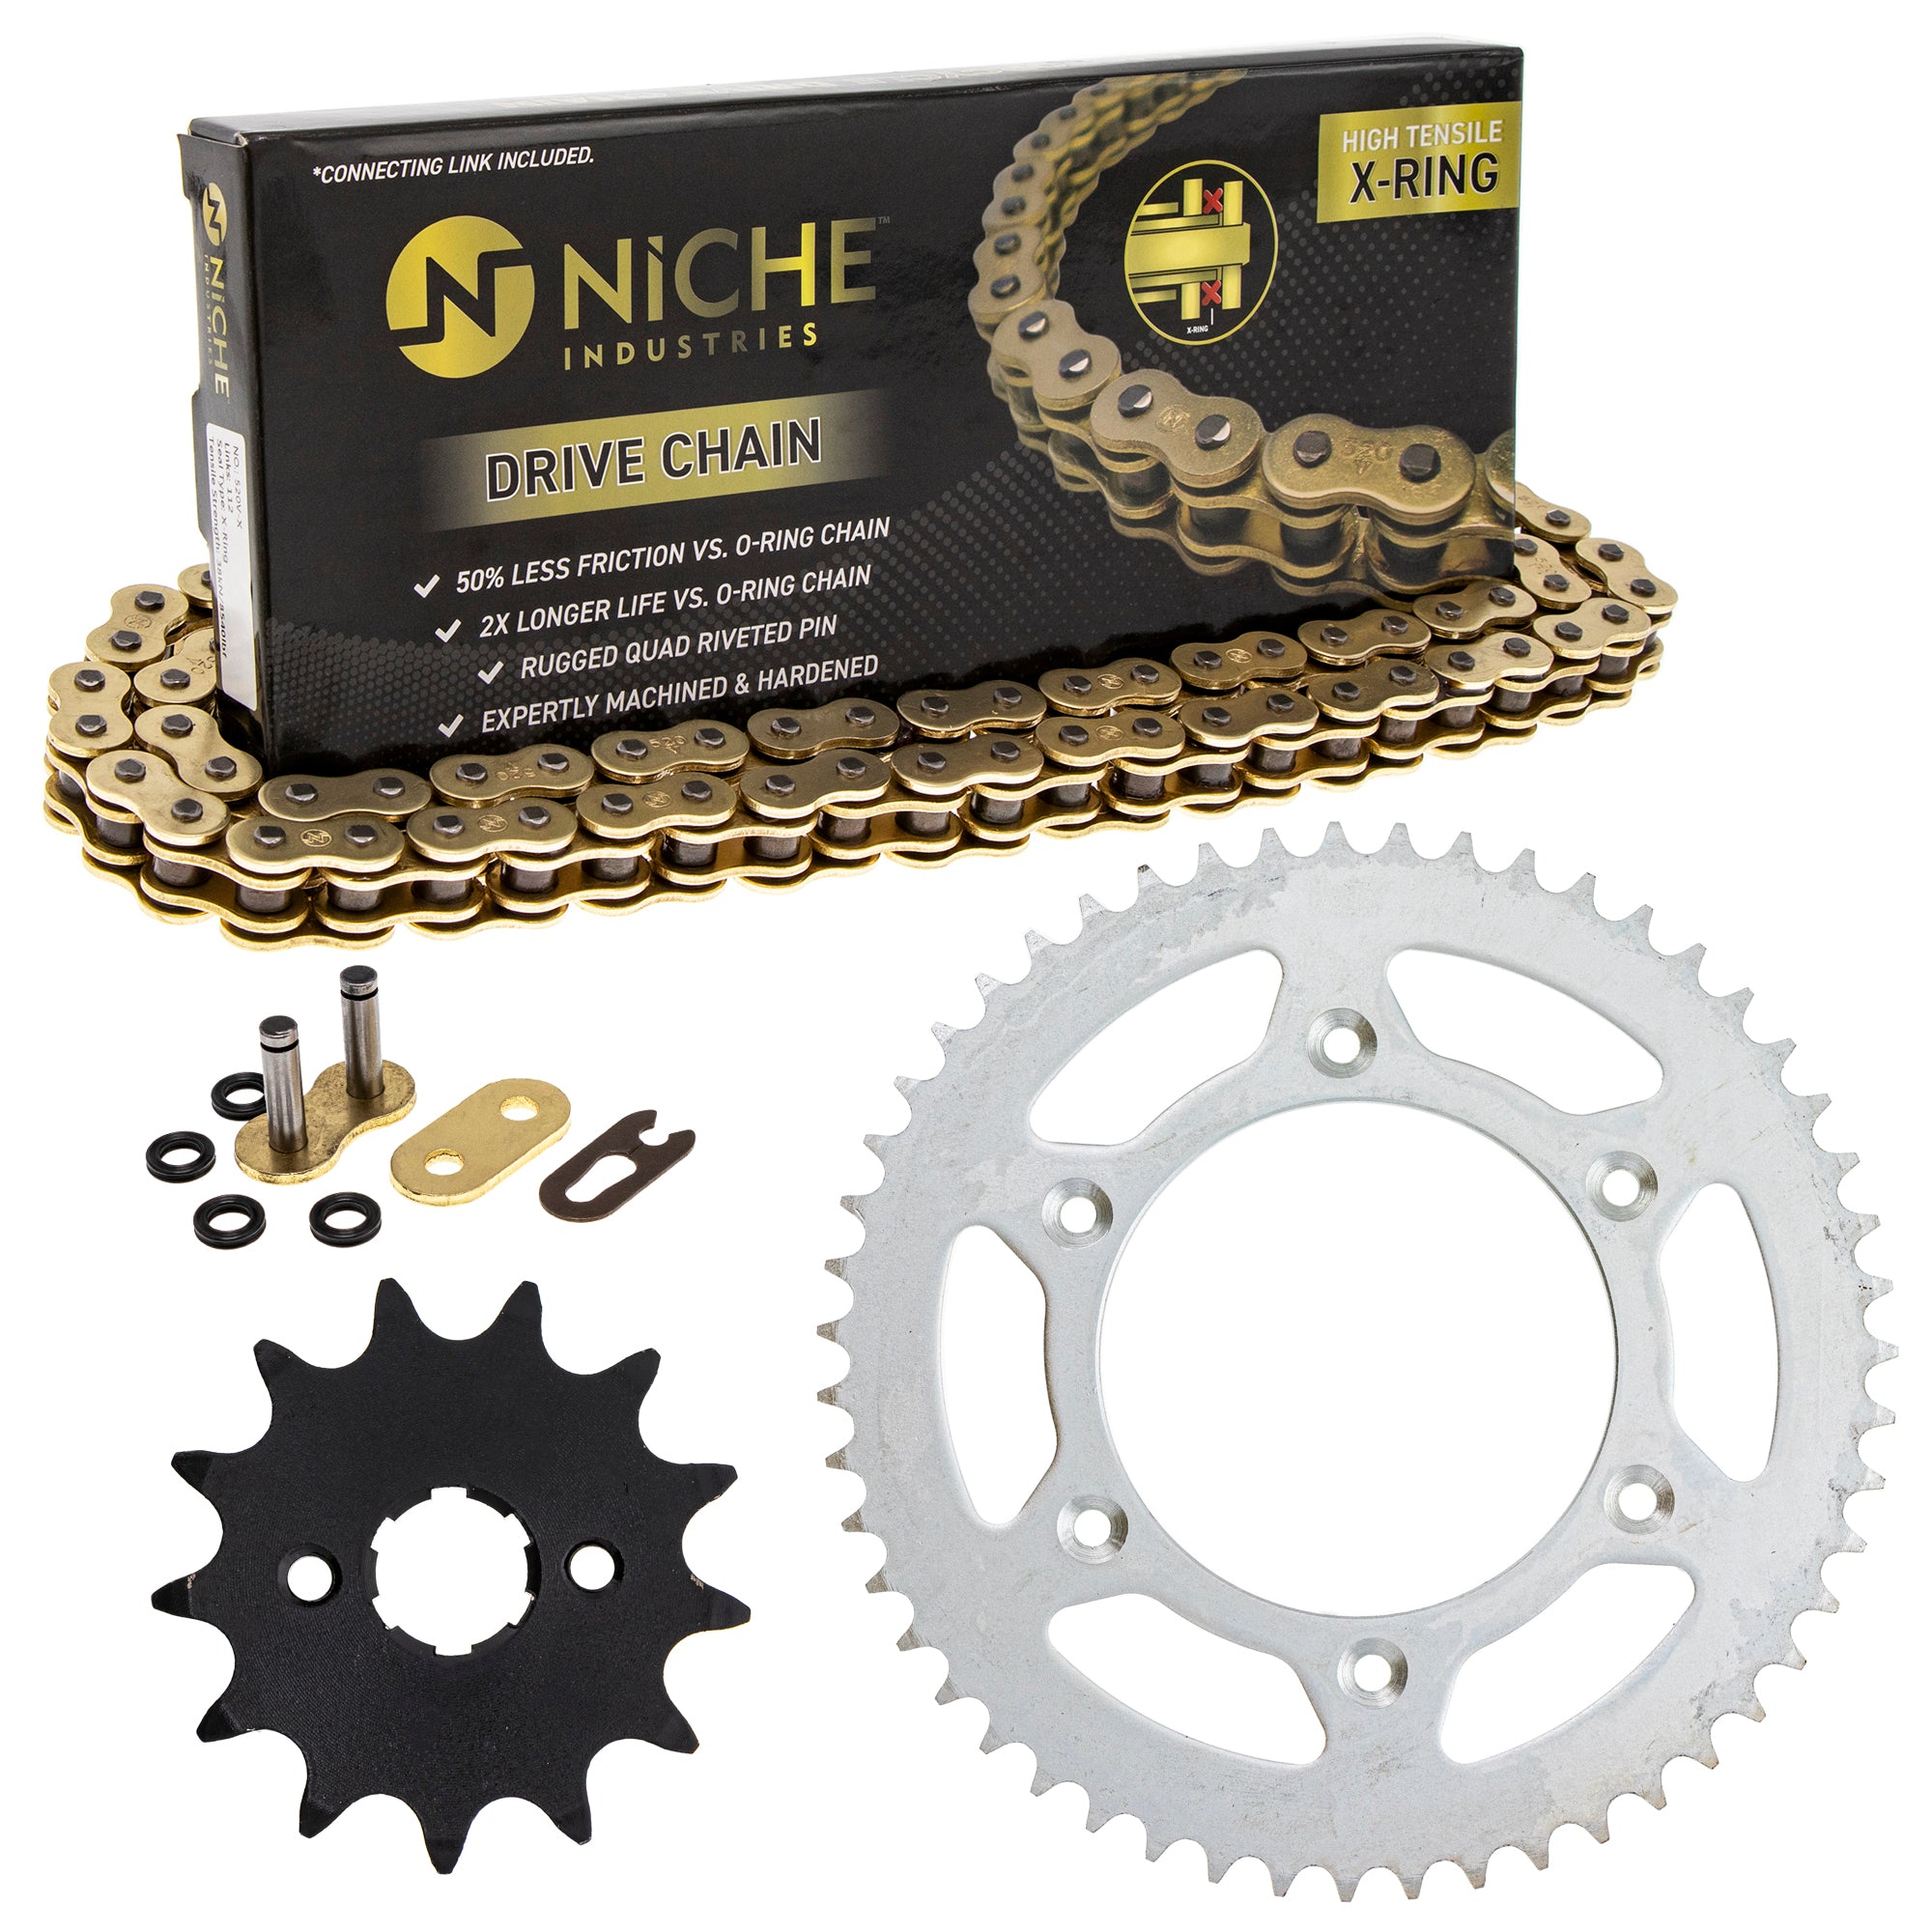 Drive Sprockets & Chain Kit for zOTHER JT Sprocket Honda Elsinore CR125R 40530-KCY-652 NICHE MK1004786